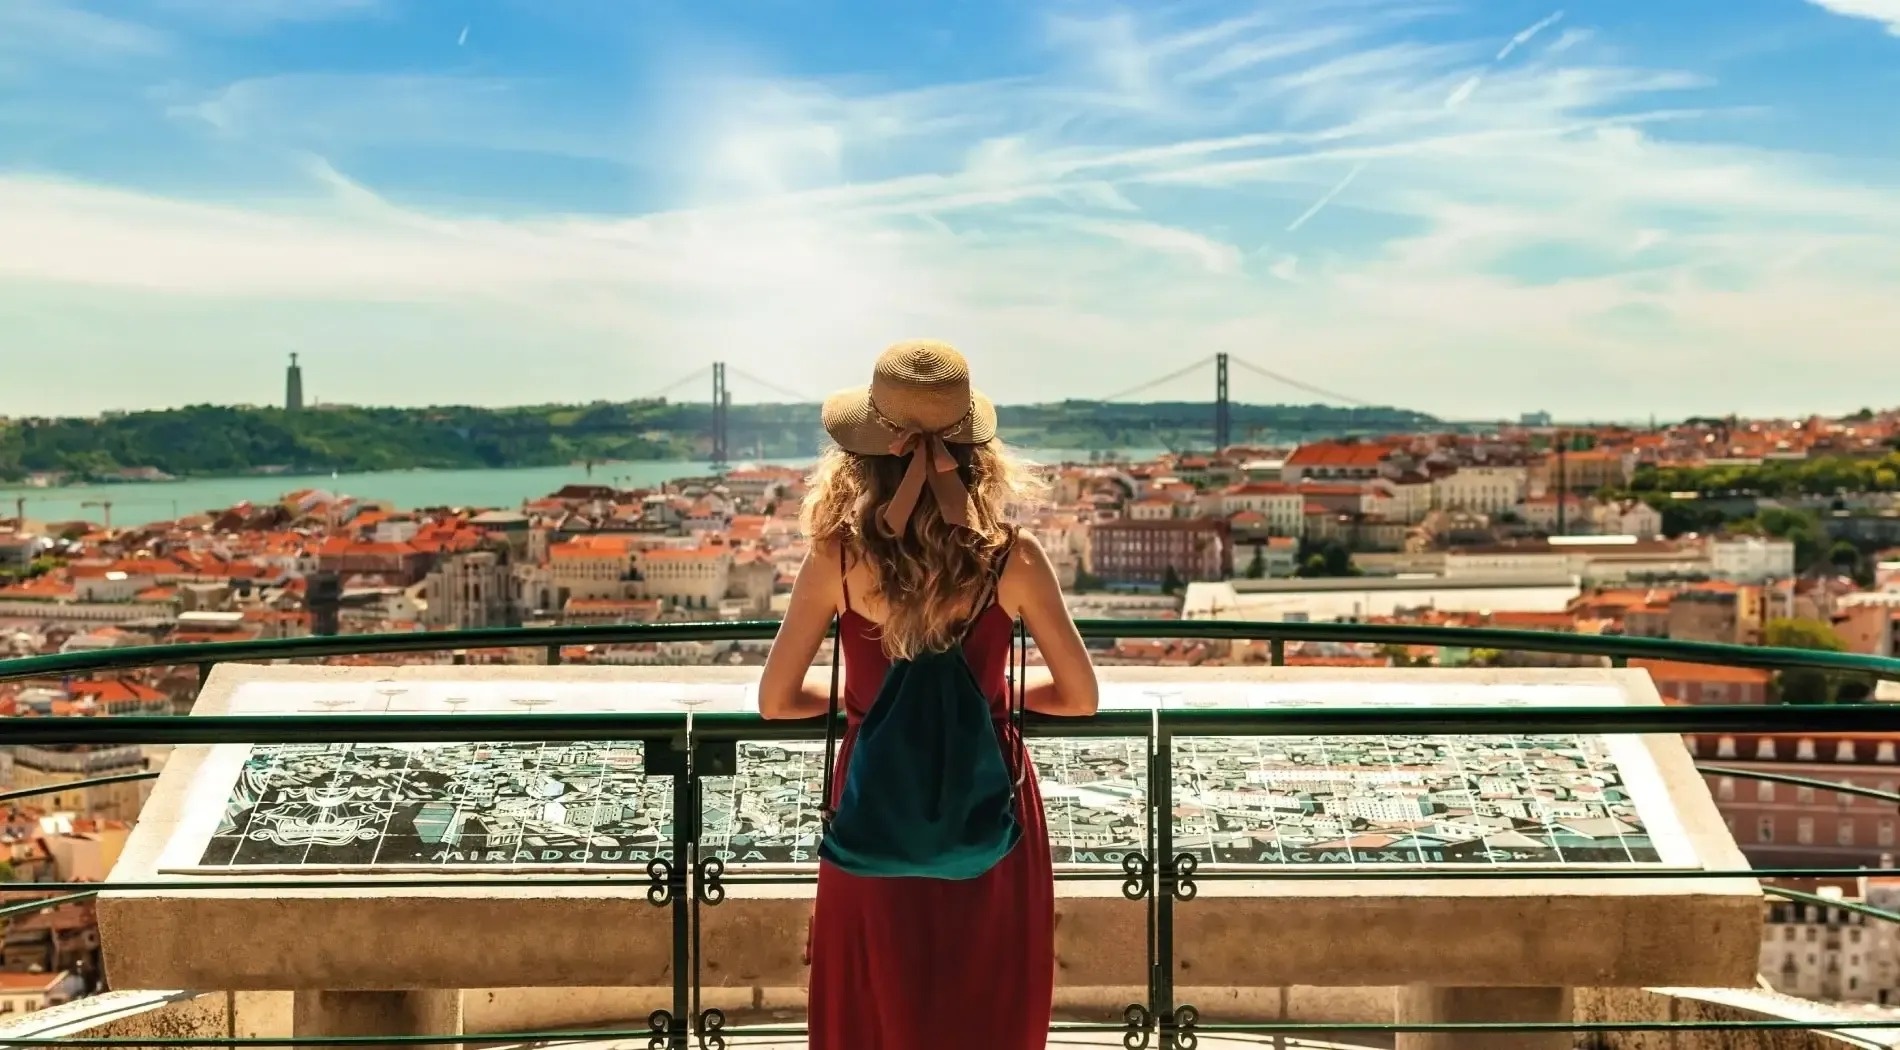 a woman in a red dress is looking out over a city